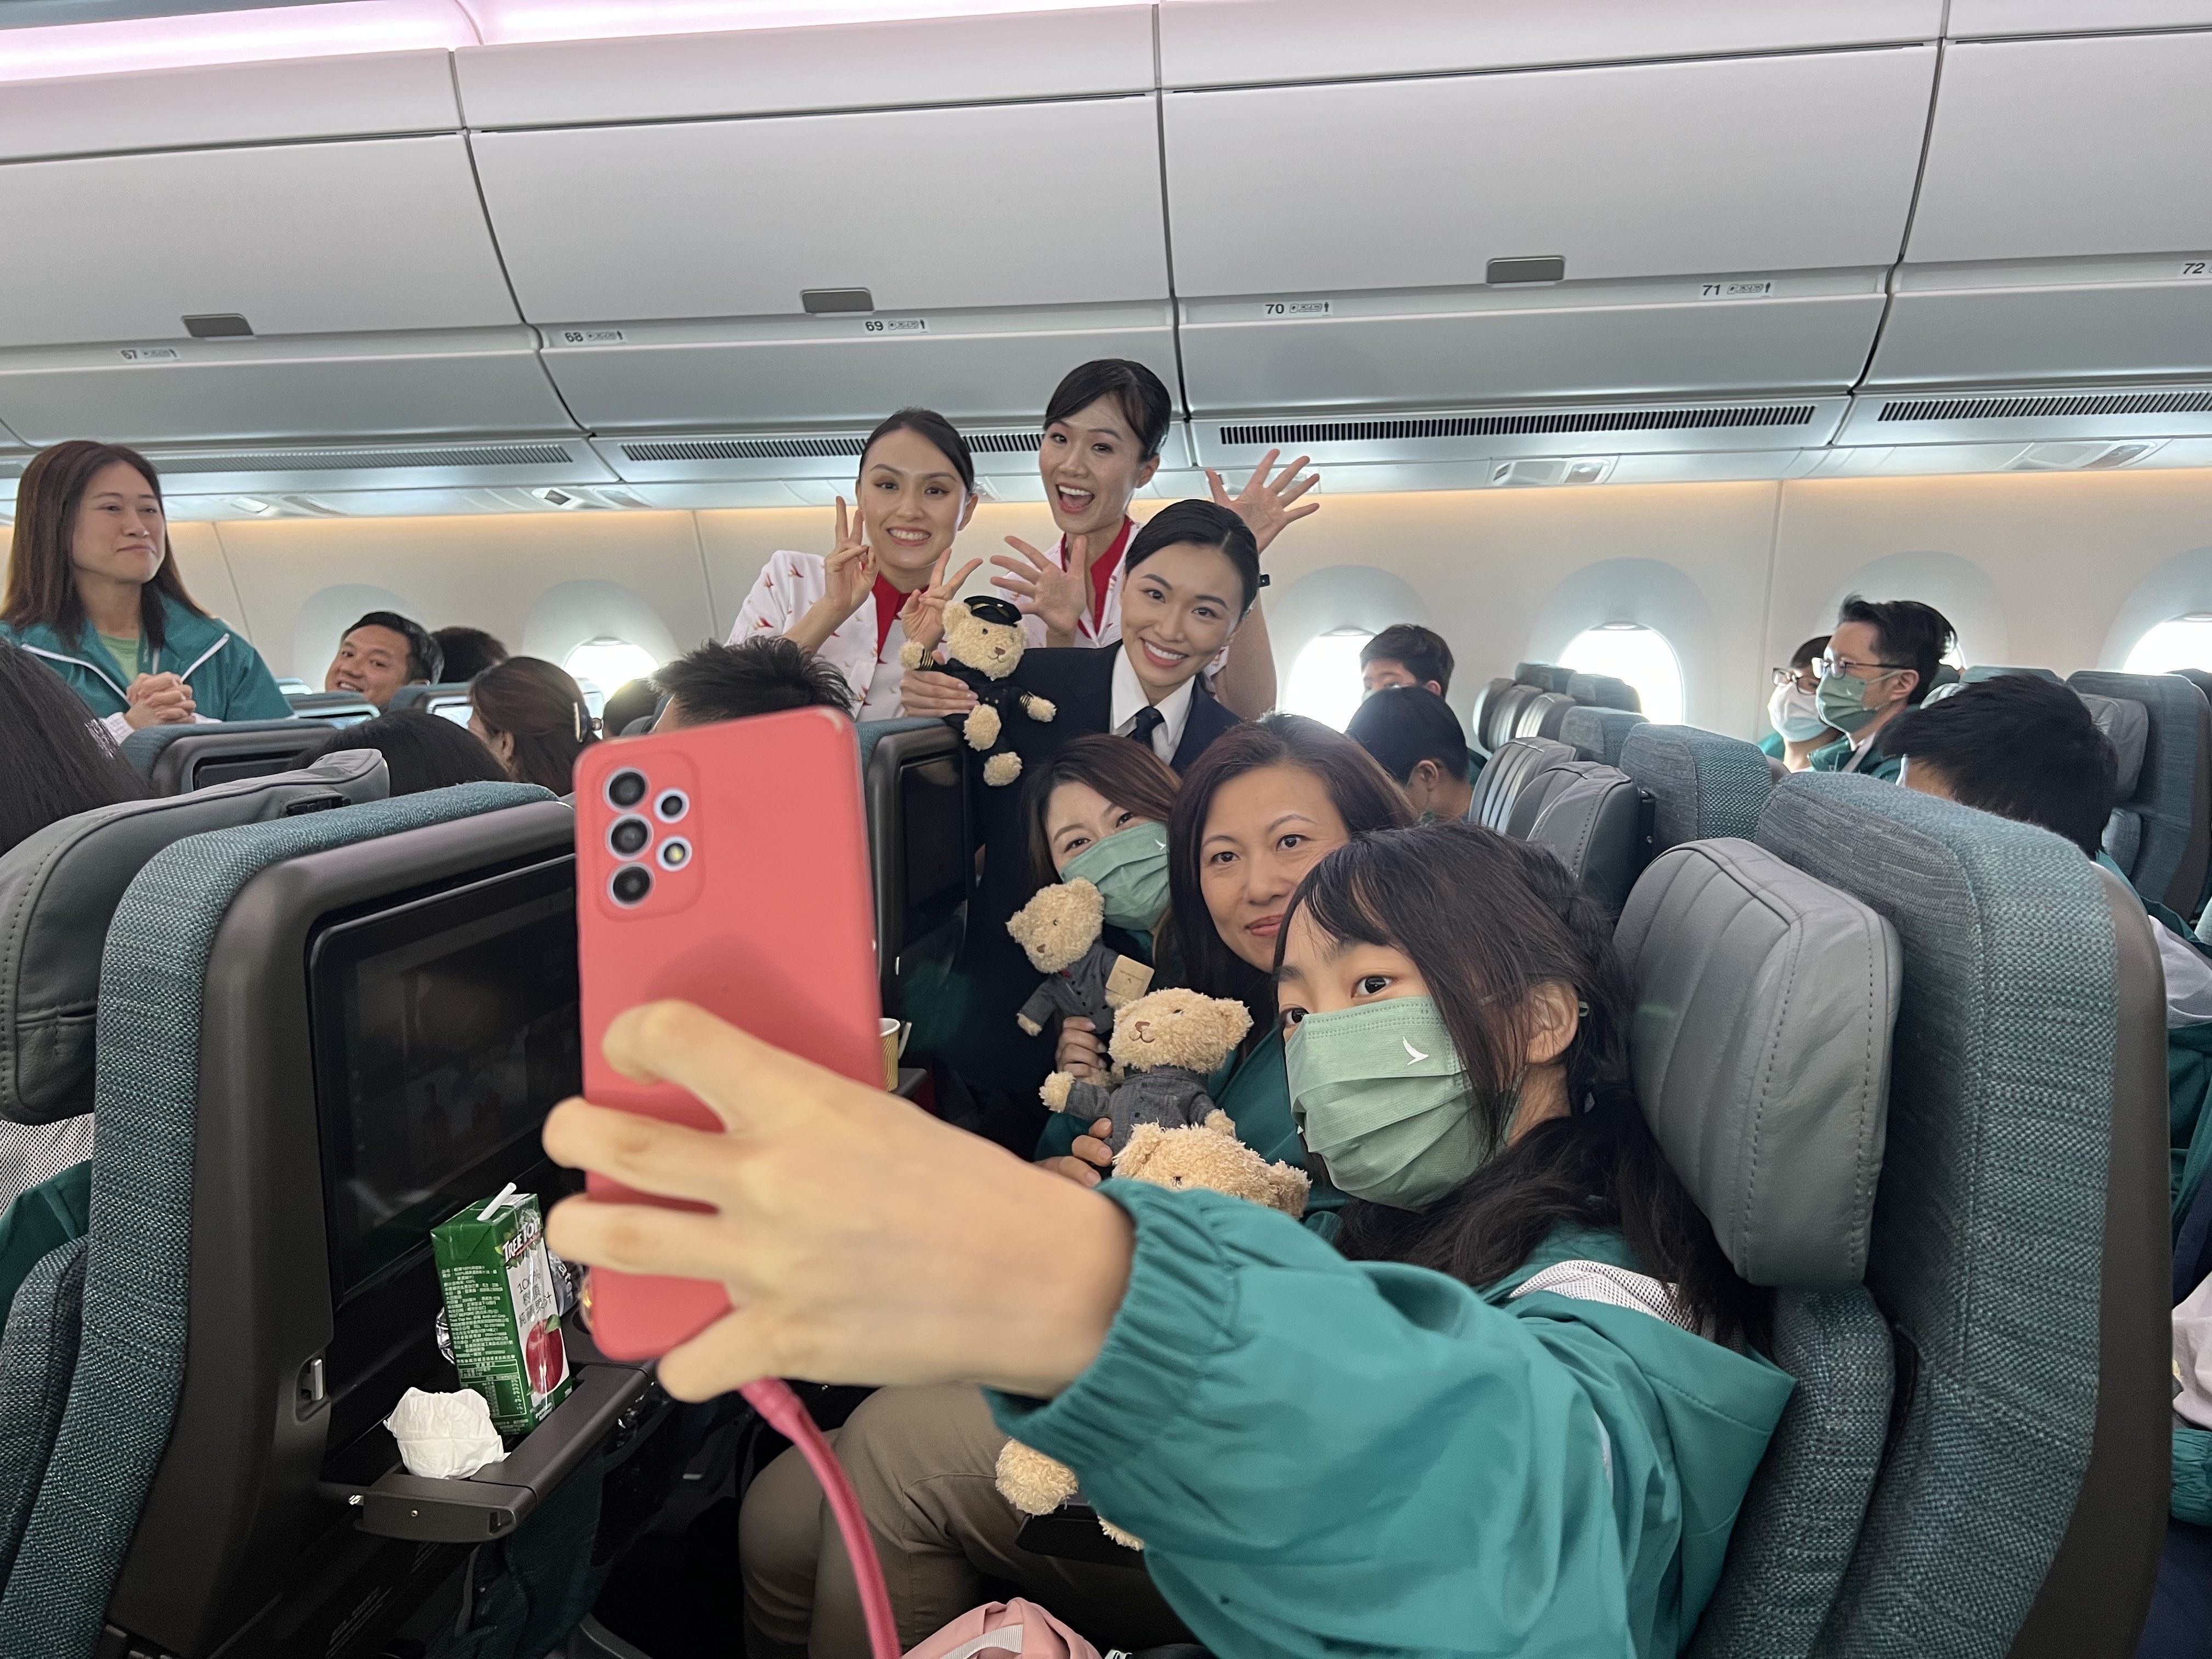 Jenny Lau poses for a photograph aboard the free Cathay flight on Sunday. Photo: Willa Wu